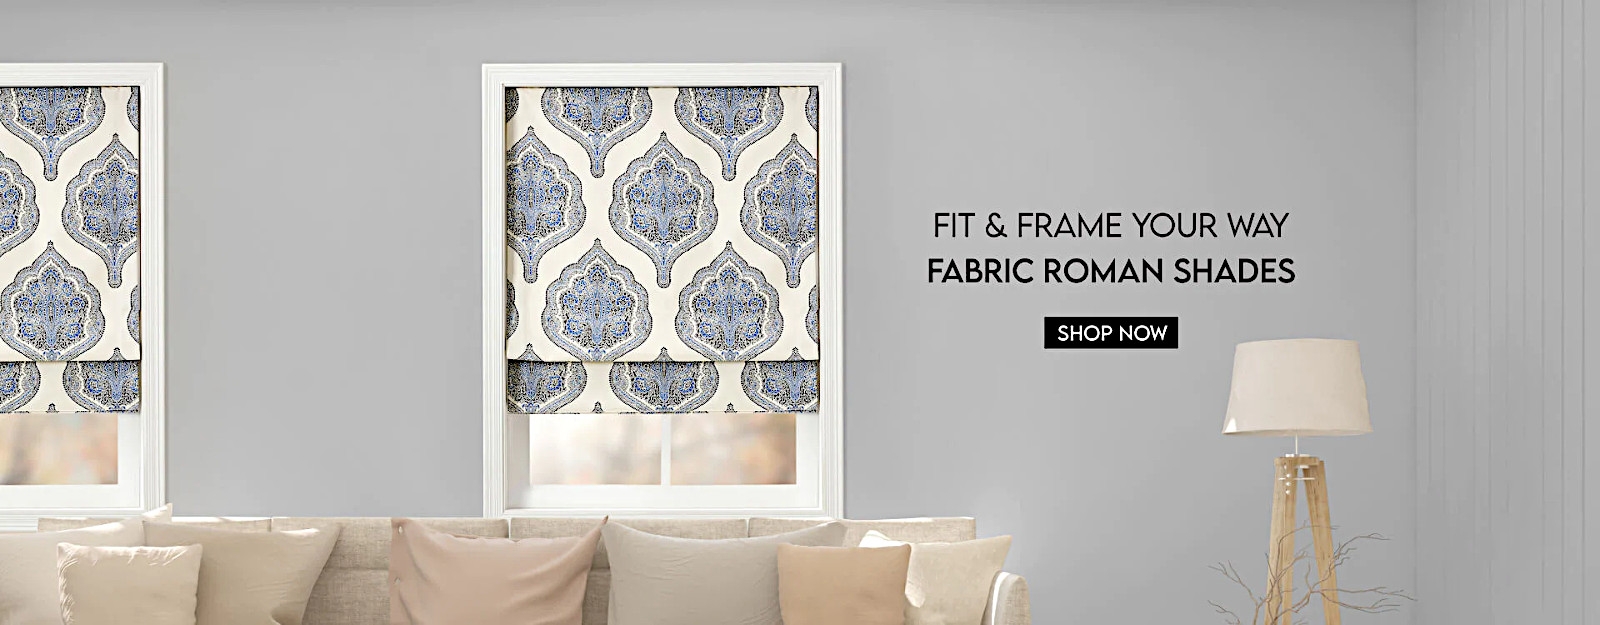 Discounted Price roman shades